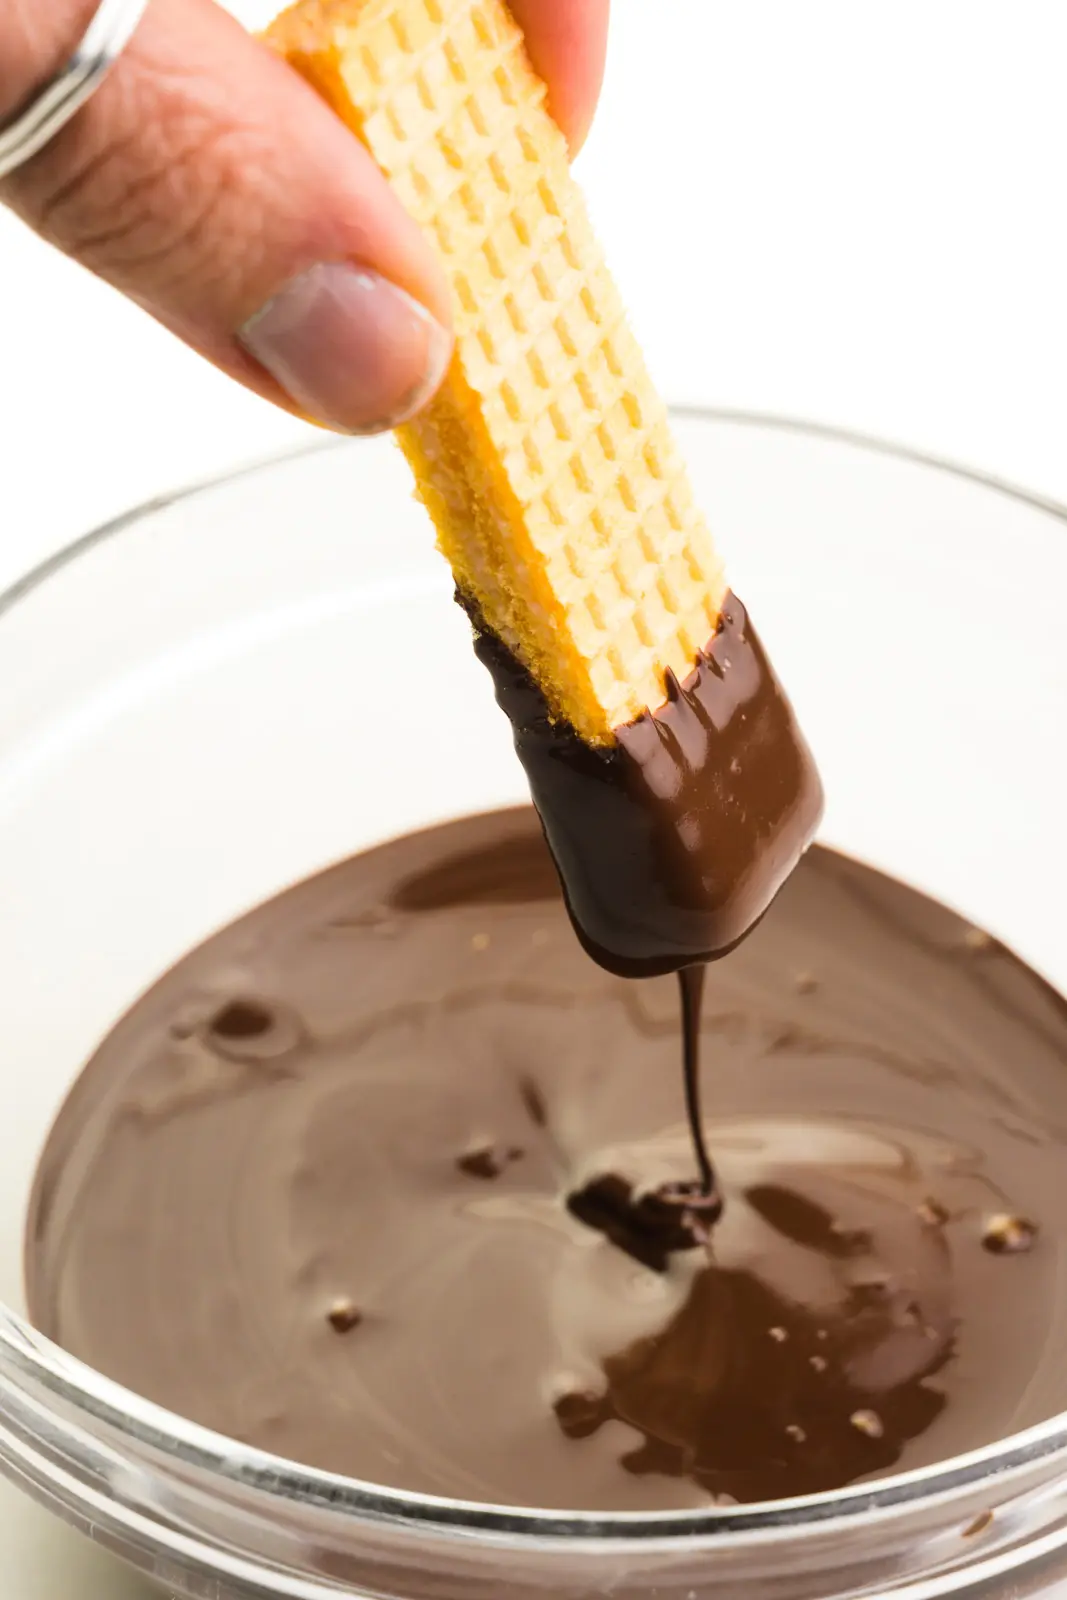 A hand holds a cookie, dipping it in melted chocolate.